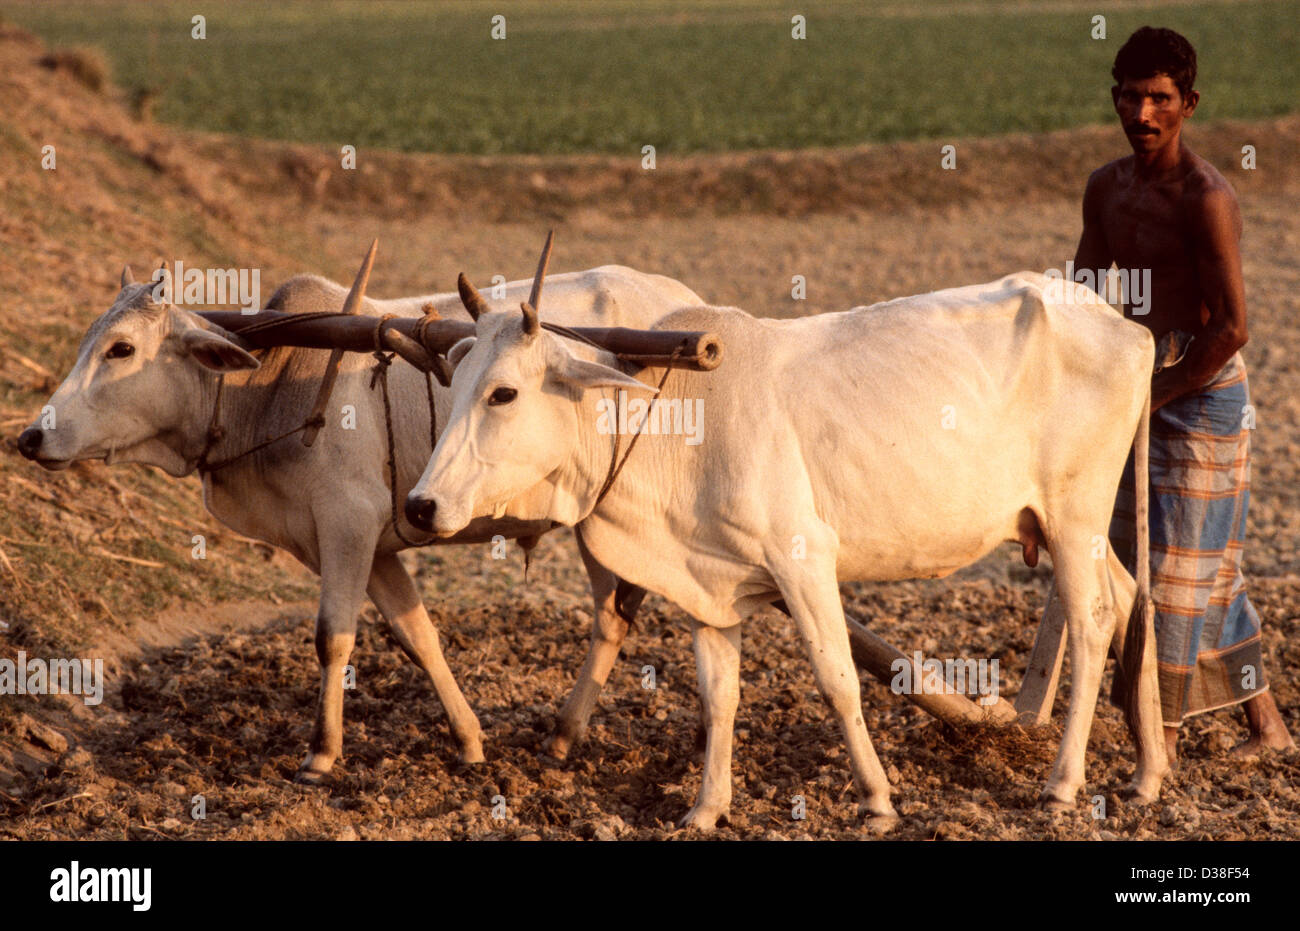 Farm labourer ploughing a field with a traditional wooden ploughshare pulled by oxen. Jamalpur district. Bangladesh Stock Photo